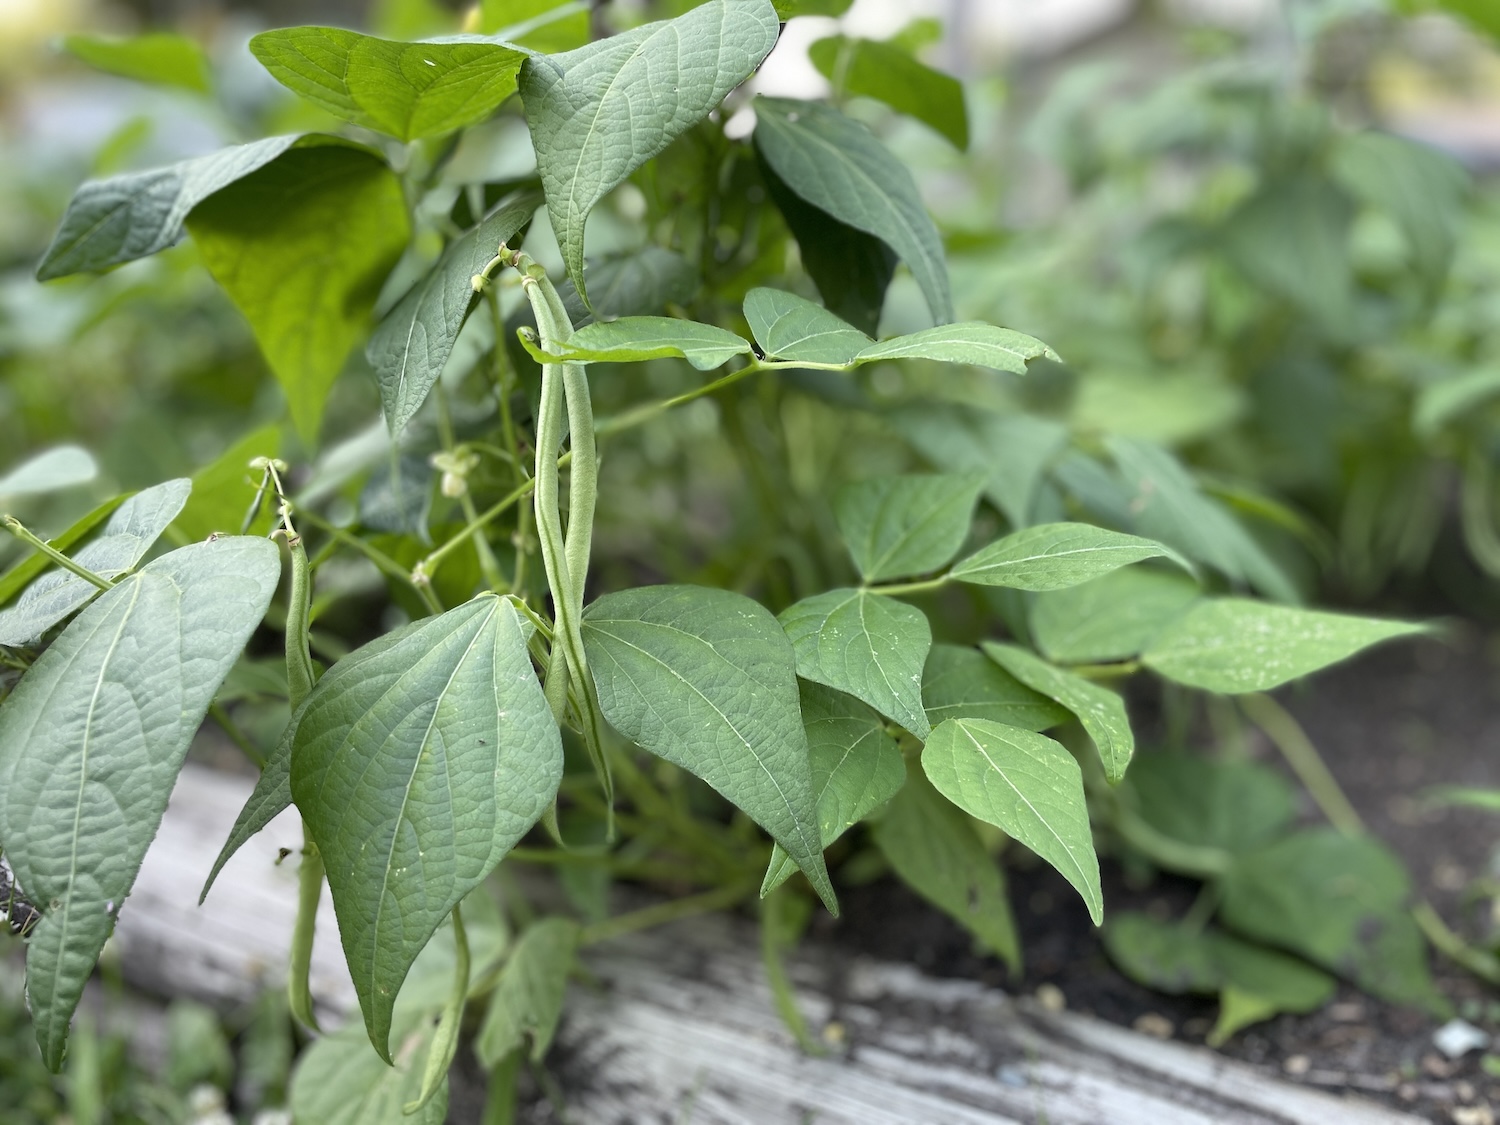 A close up view of bush beans growing in a raised bed